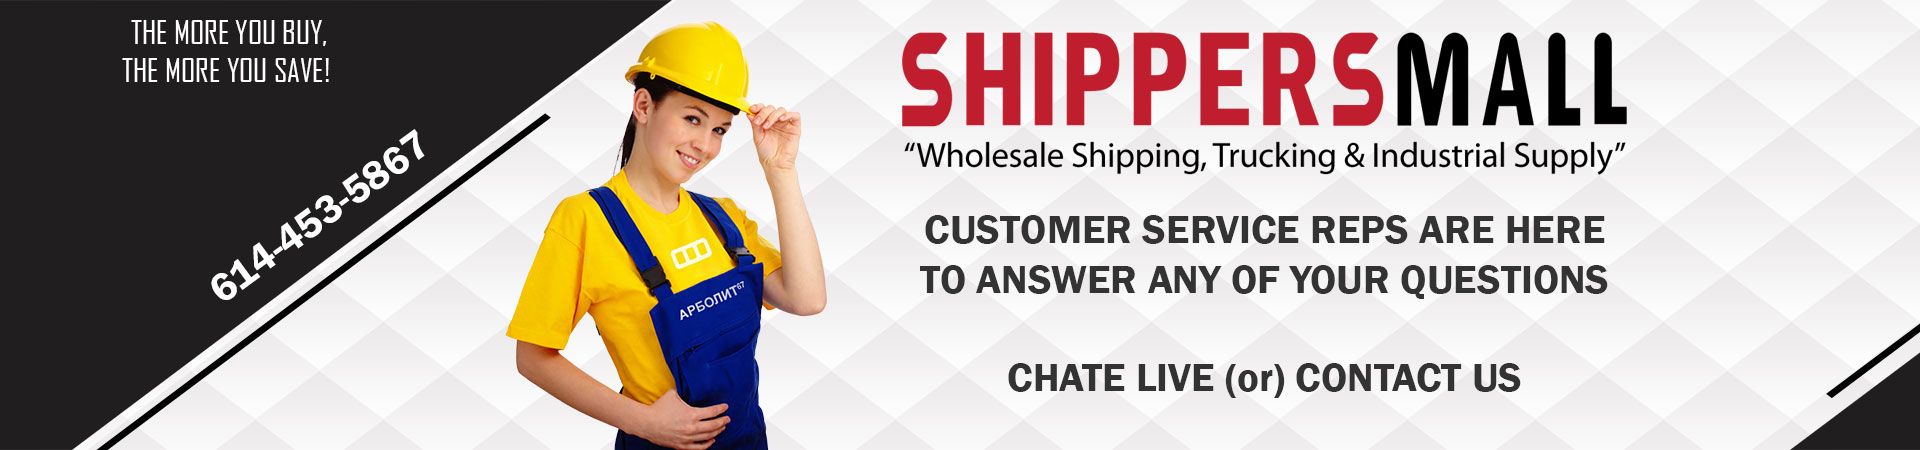 Shippers Mall Wholesale Shipping, Trucking and Industrial Supply